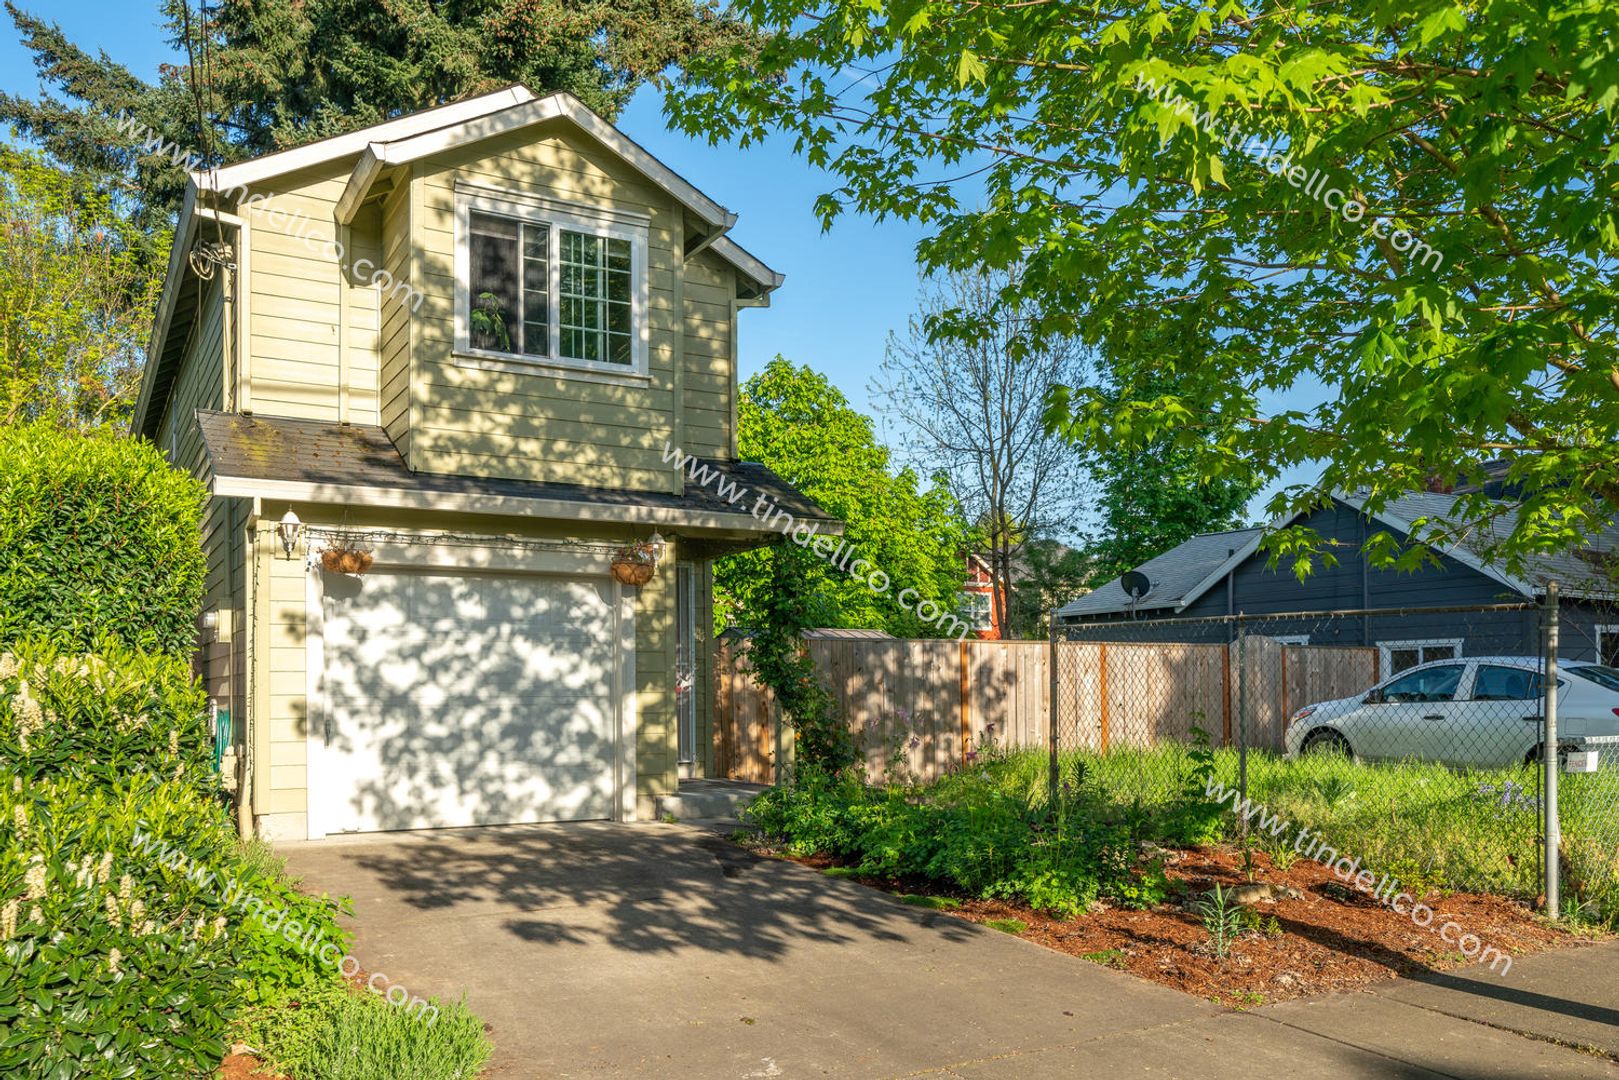 Charming 3-Bedroom Home in Kenton Neighborhood with Attached Garage and Fenced Yard!